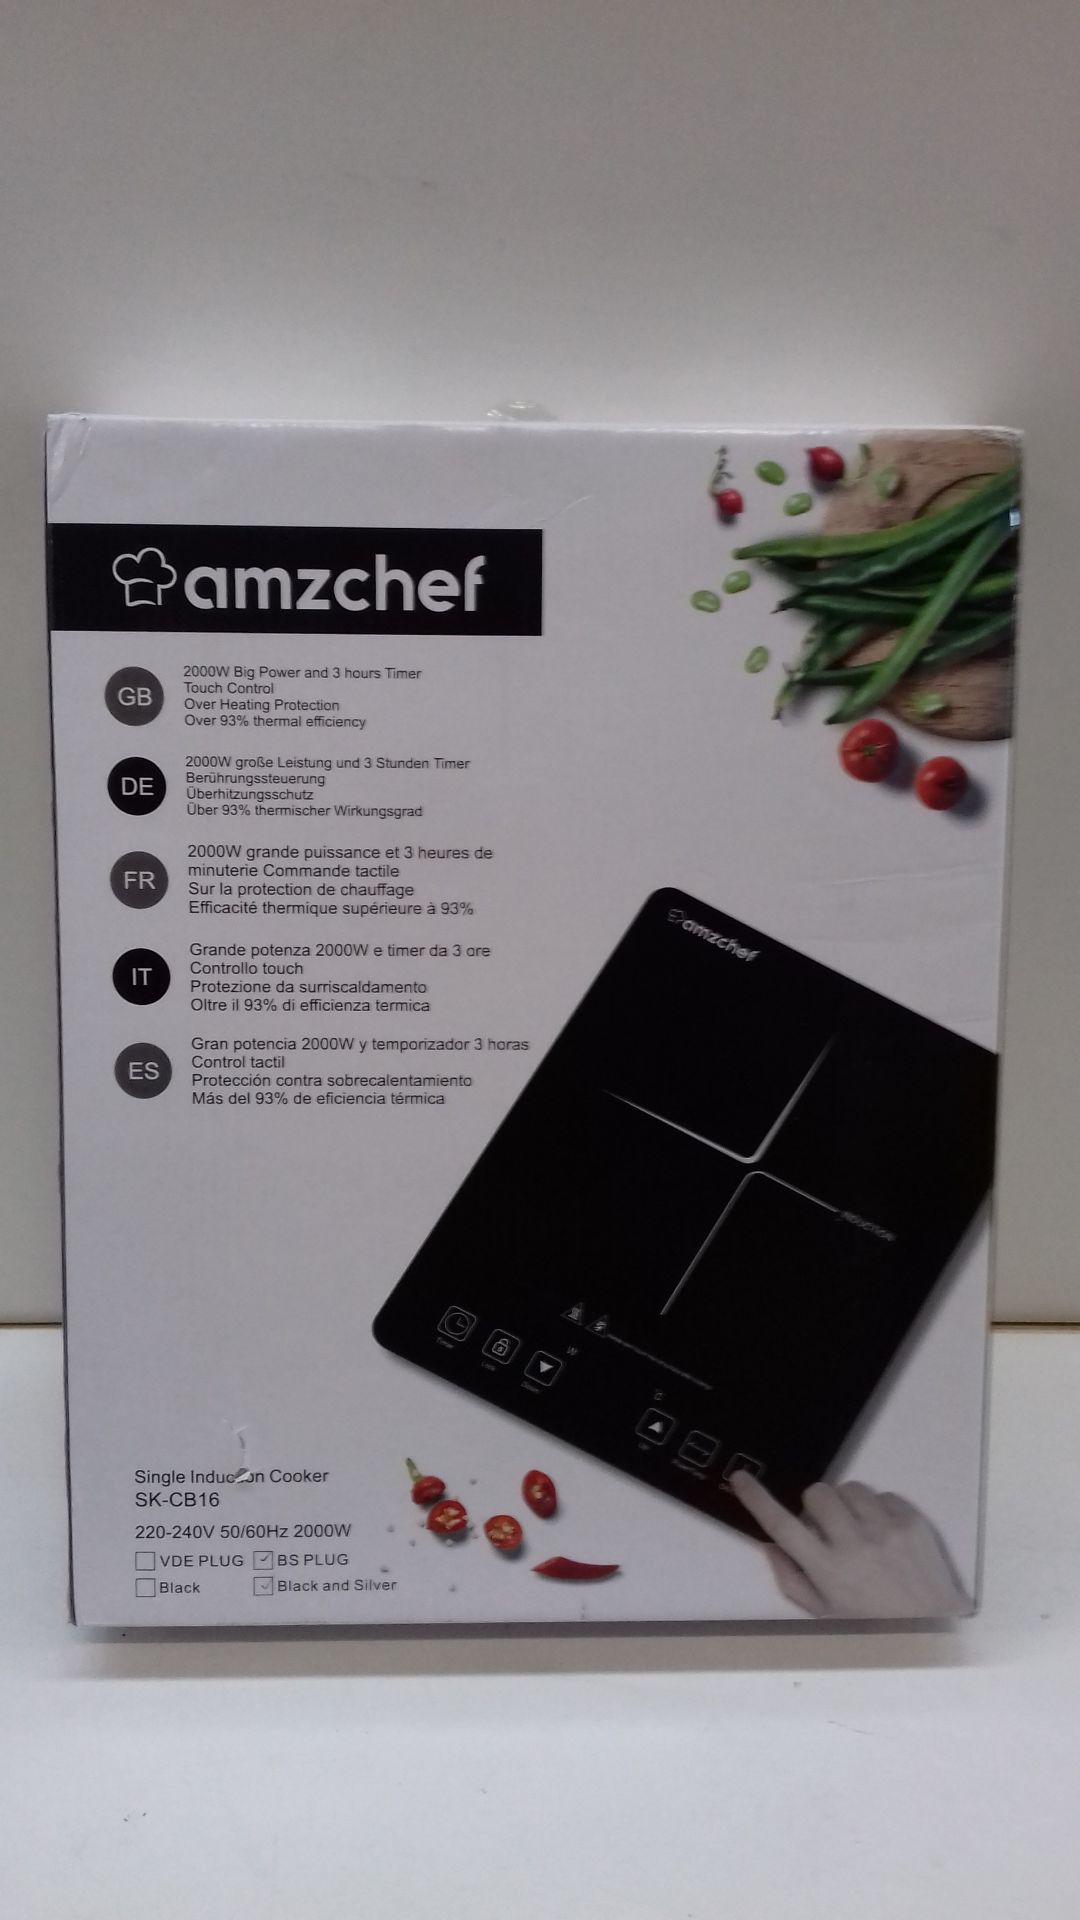 RRP £55.49 AMZCHEF Single Induction Cooker - Image 2 of 2